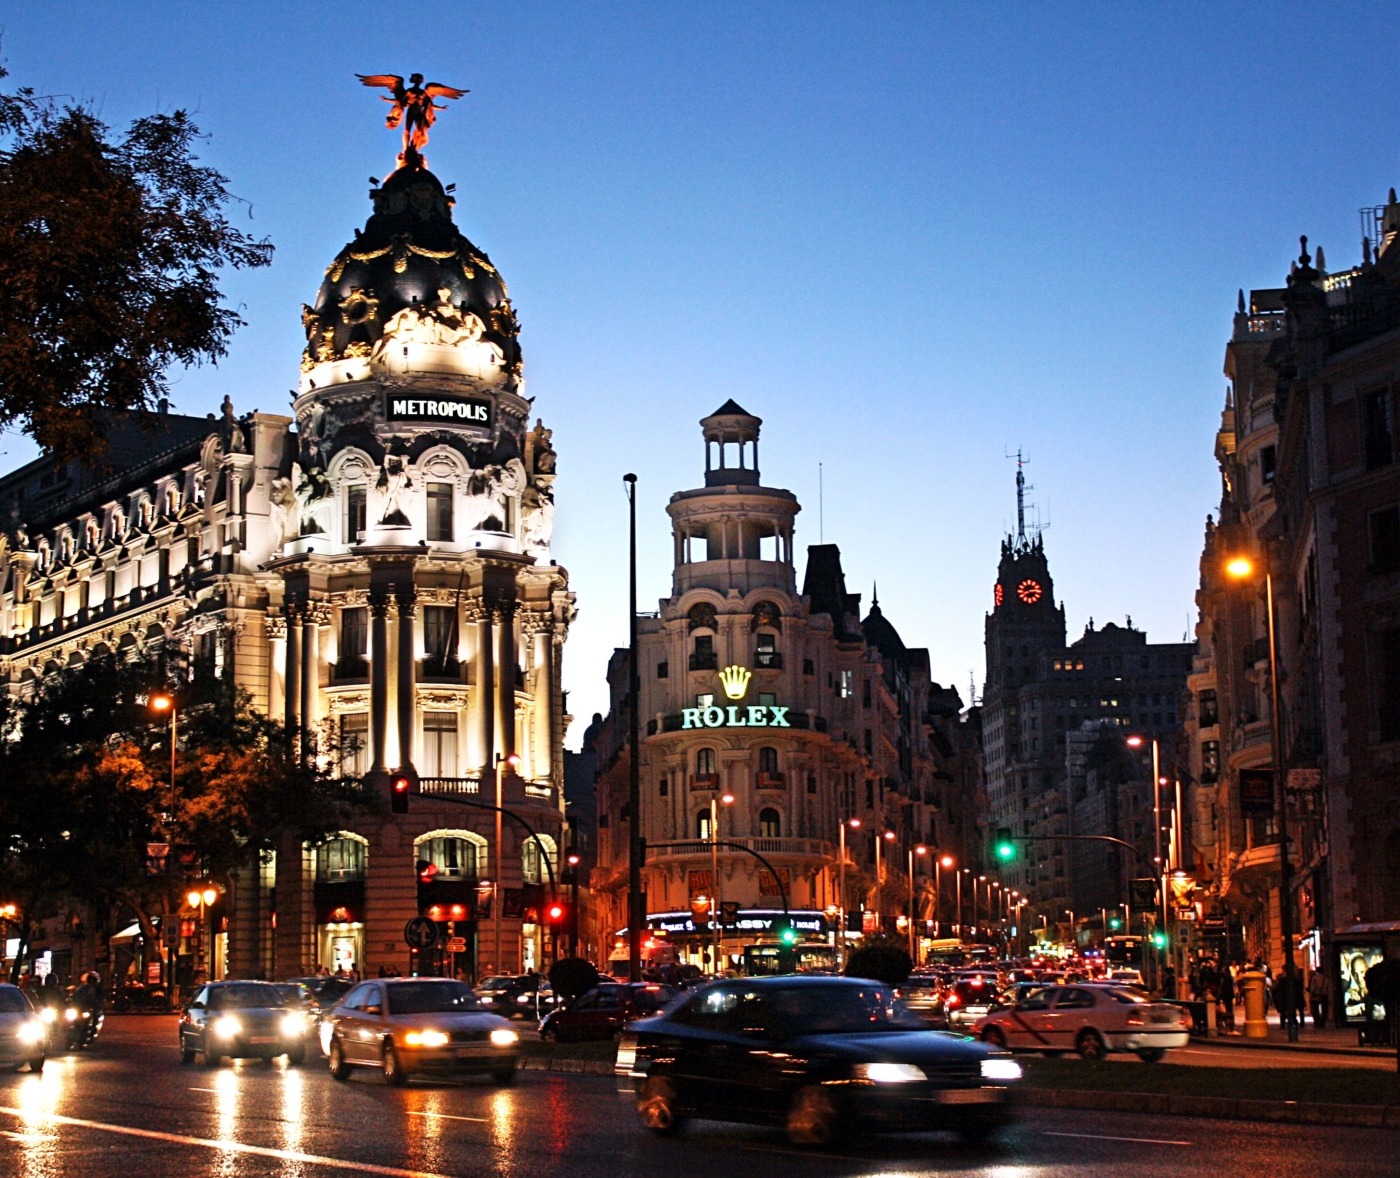 city of Madrid image, gran via in the evening